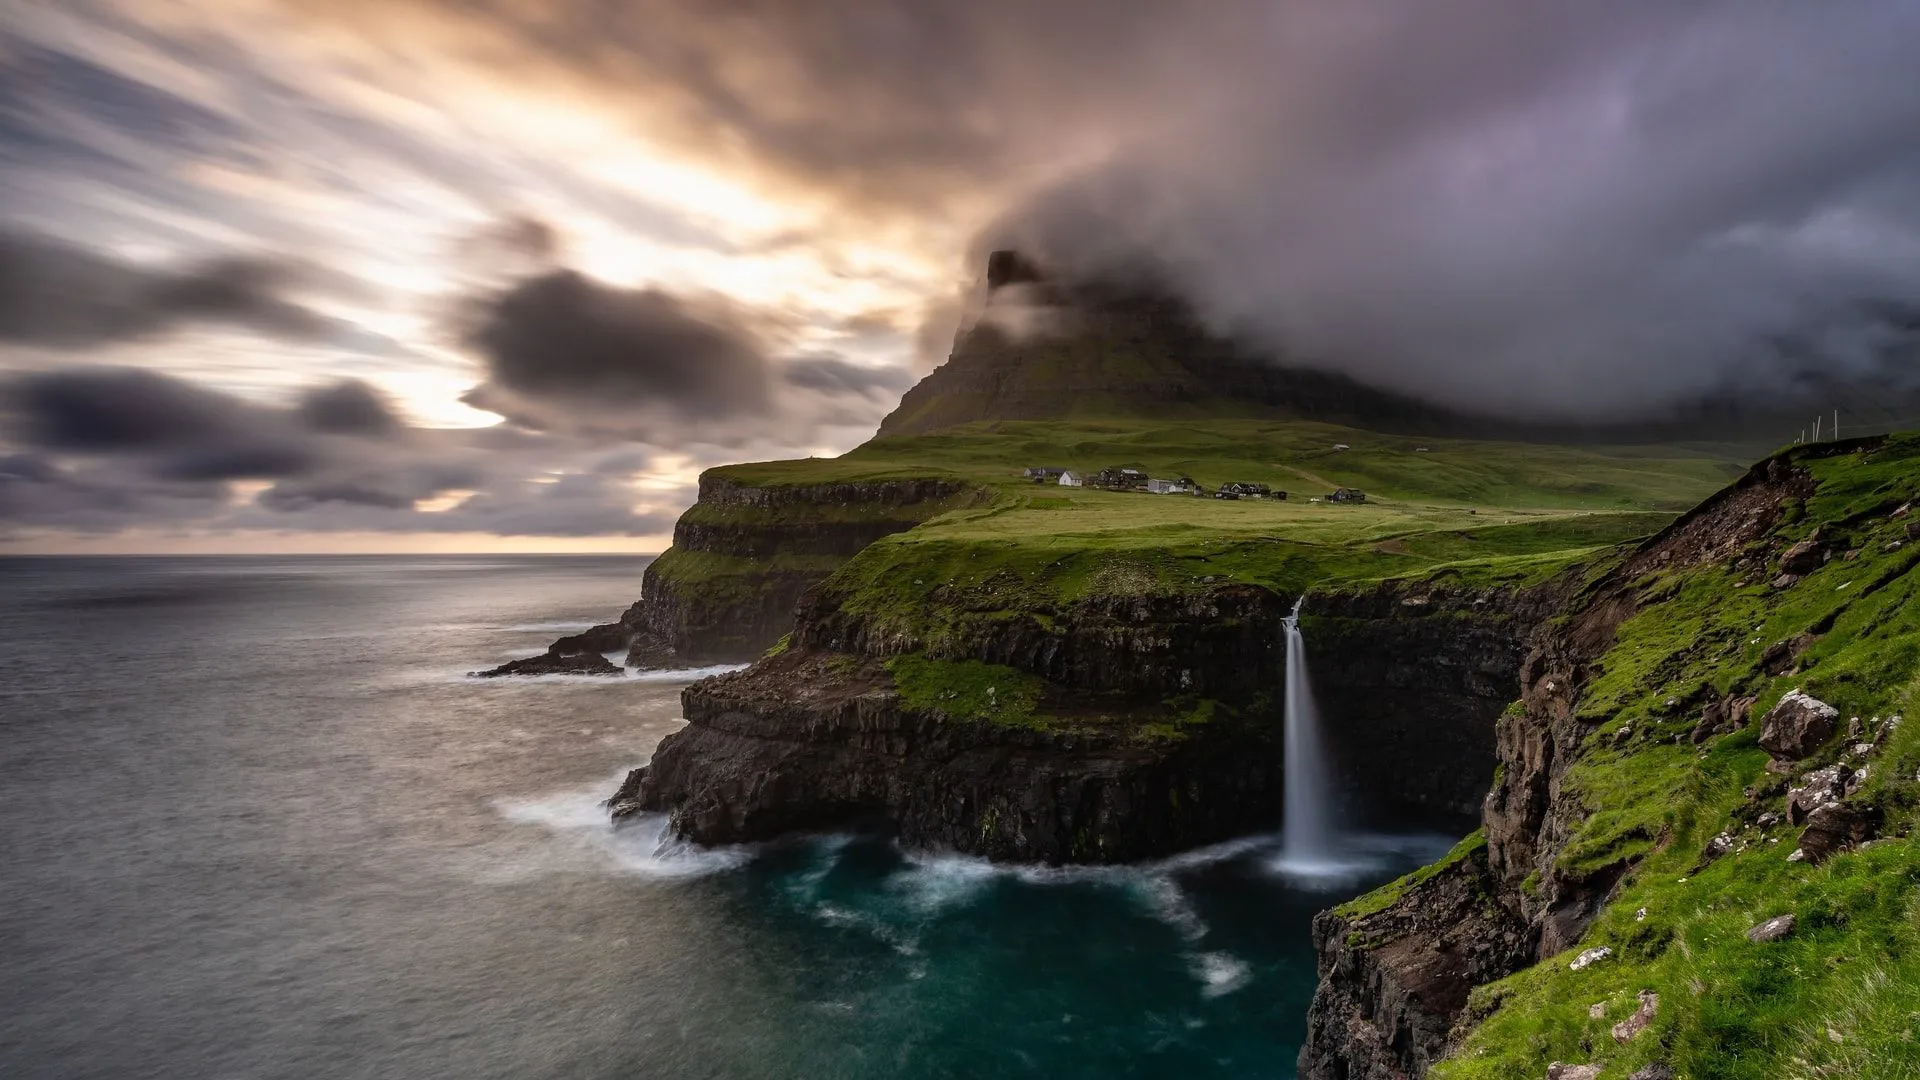 Many people are unfamiliar with the self-governing Faroe Islands, yet this breathtakingly gorgeous Island may soon be on your travel list.